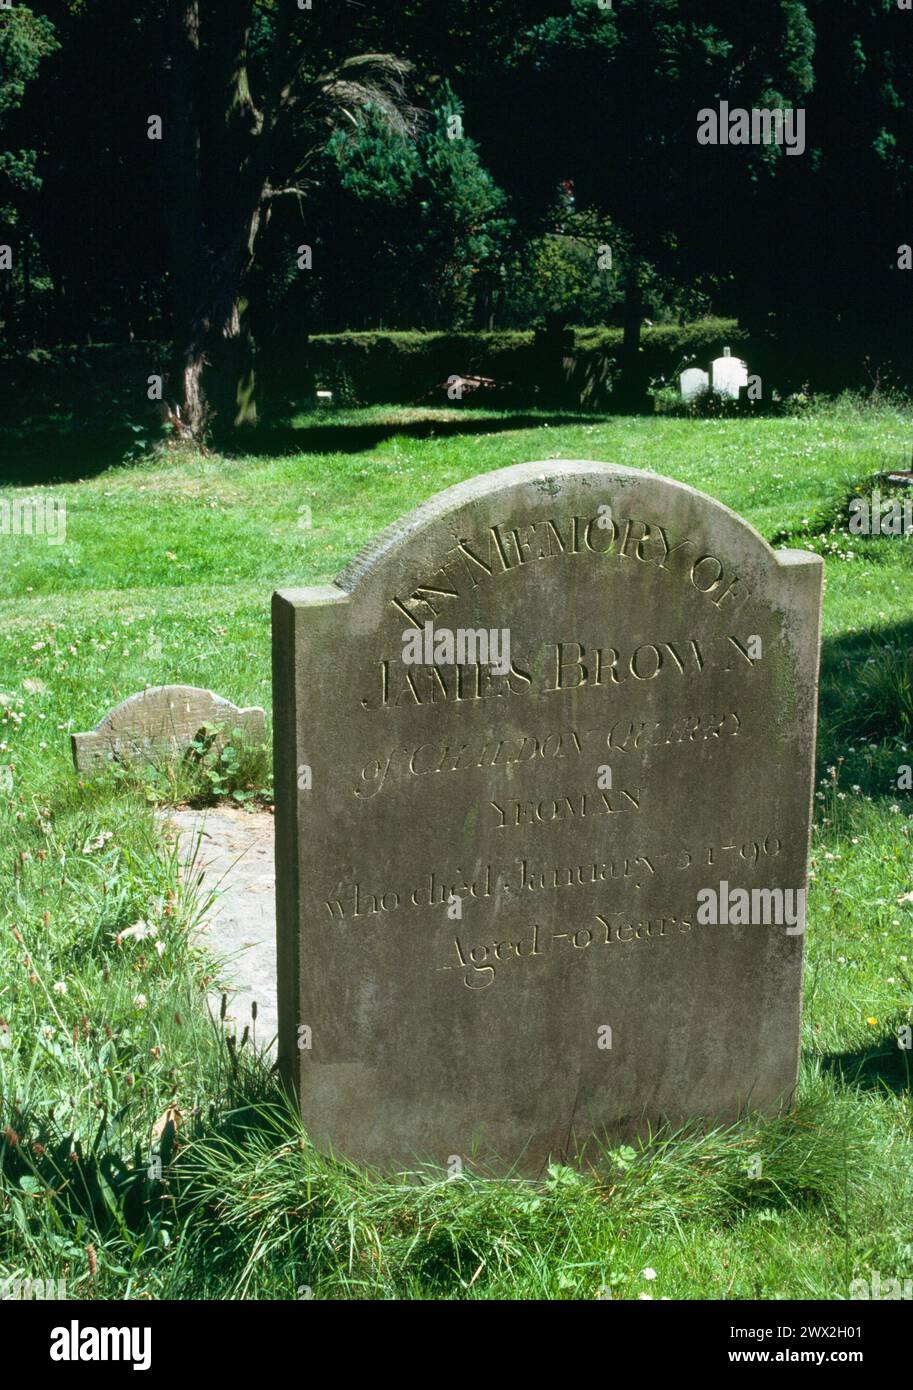 Headstone "In memory of /James Brown/of Chaldon Quarry/Yeoman,..' St Peter and St Paul church, Chaldon, Surrey, England Stock Photo